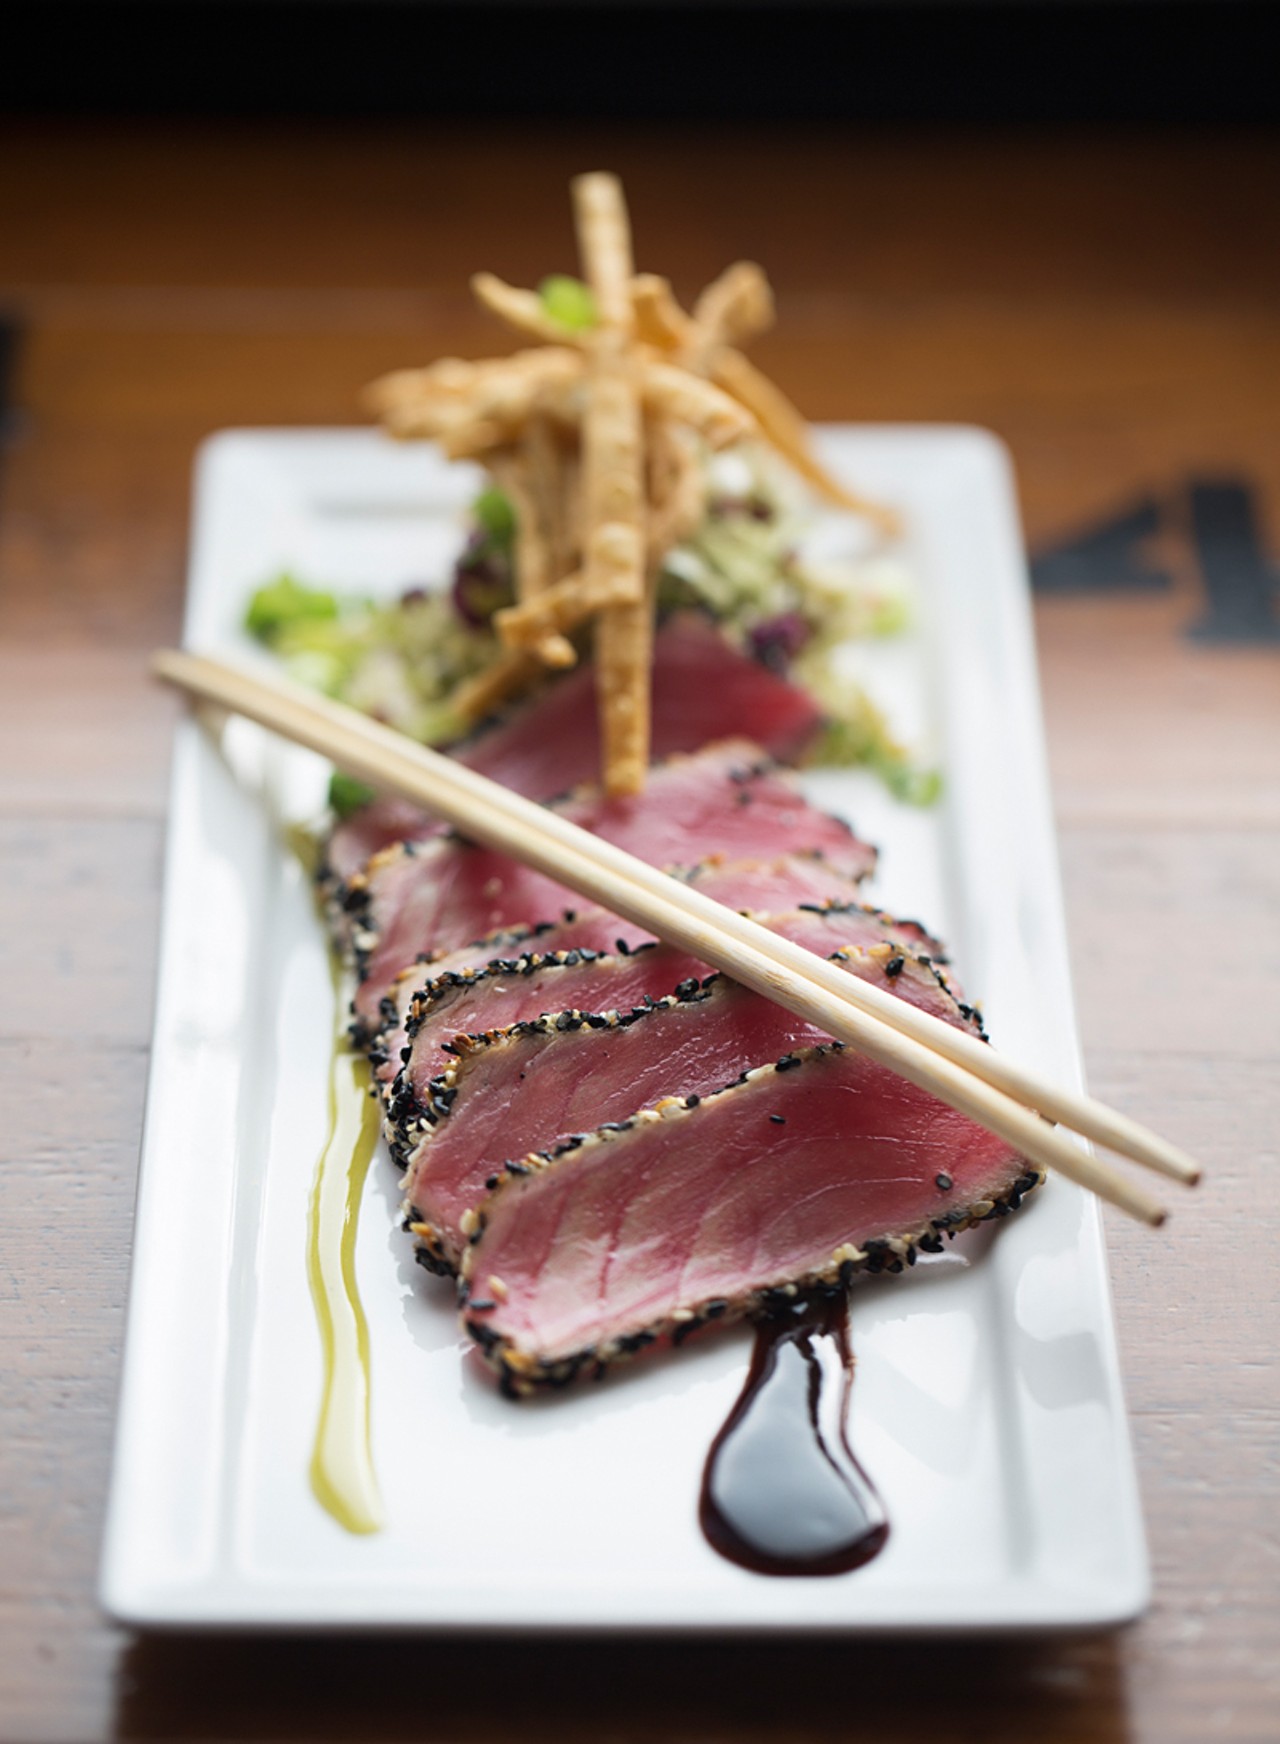 The sesame-encrusted tuna is served with a soy-ginger reduction, honey-wasabi sauce and crispy wontons.